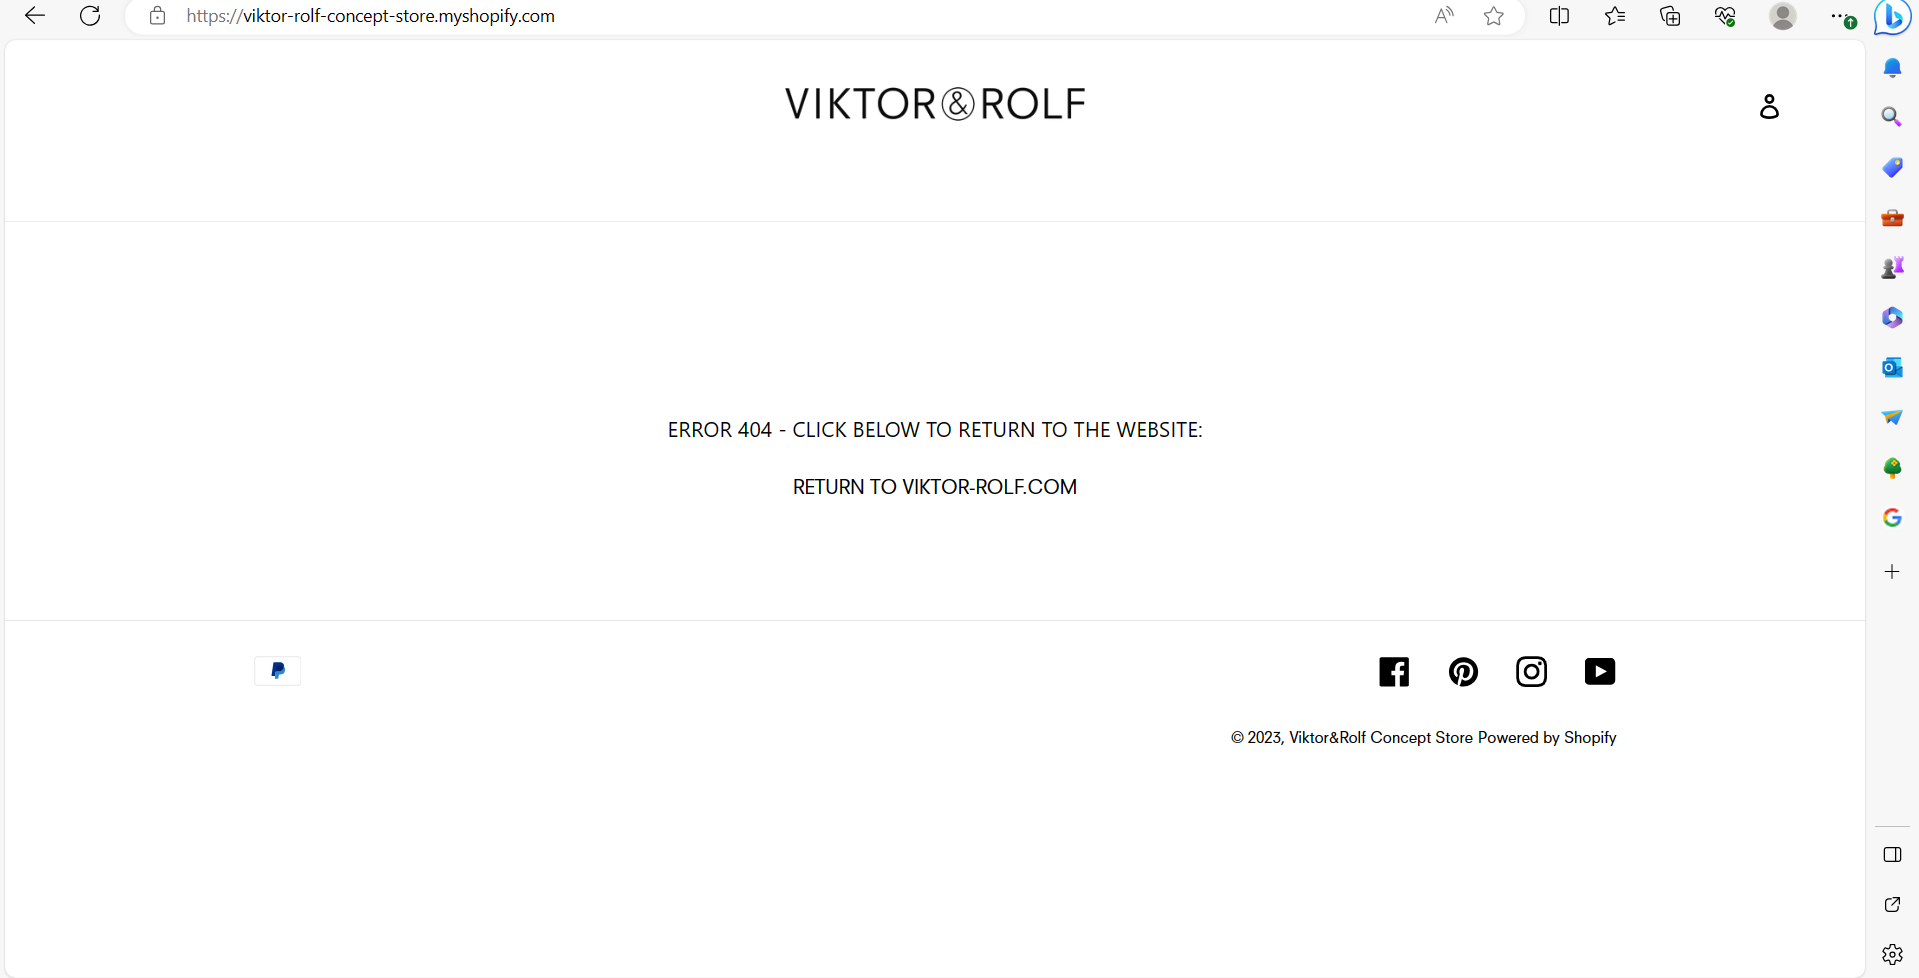 404 error after clicking on “Viktor&Rolf” icon in Account Details tab